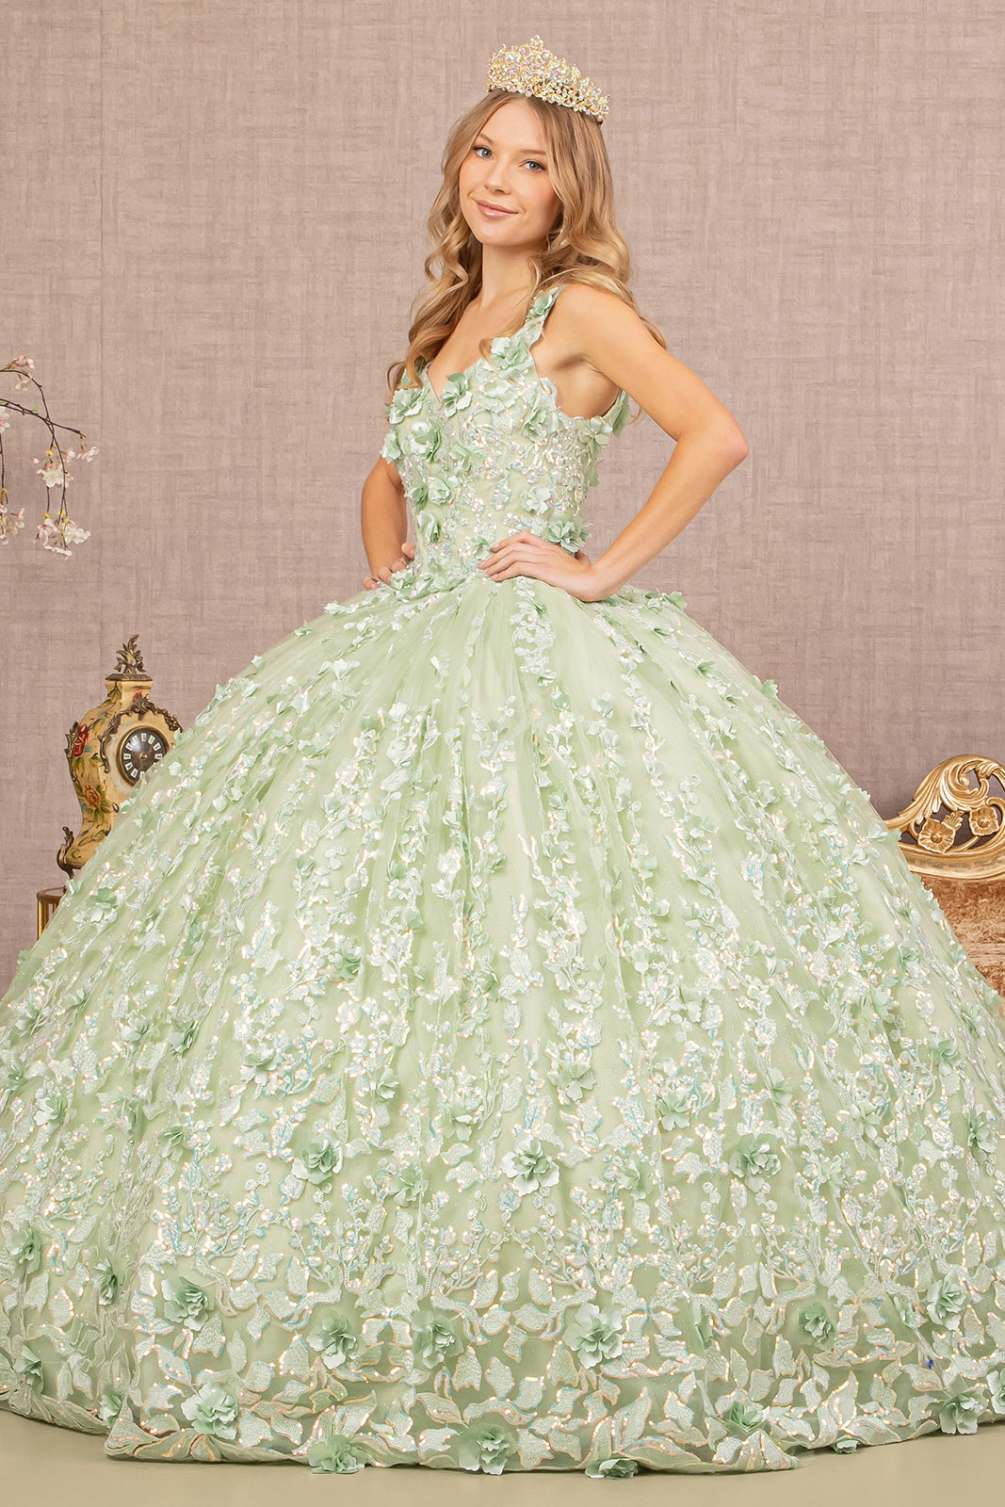 Jewel Embroidery 3-D Flower Mesh Ball Gown w/ Corset Back

This quinceanera ball